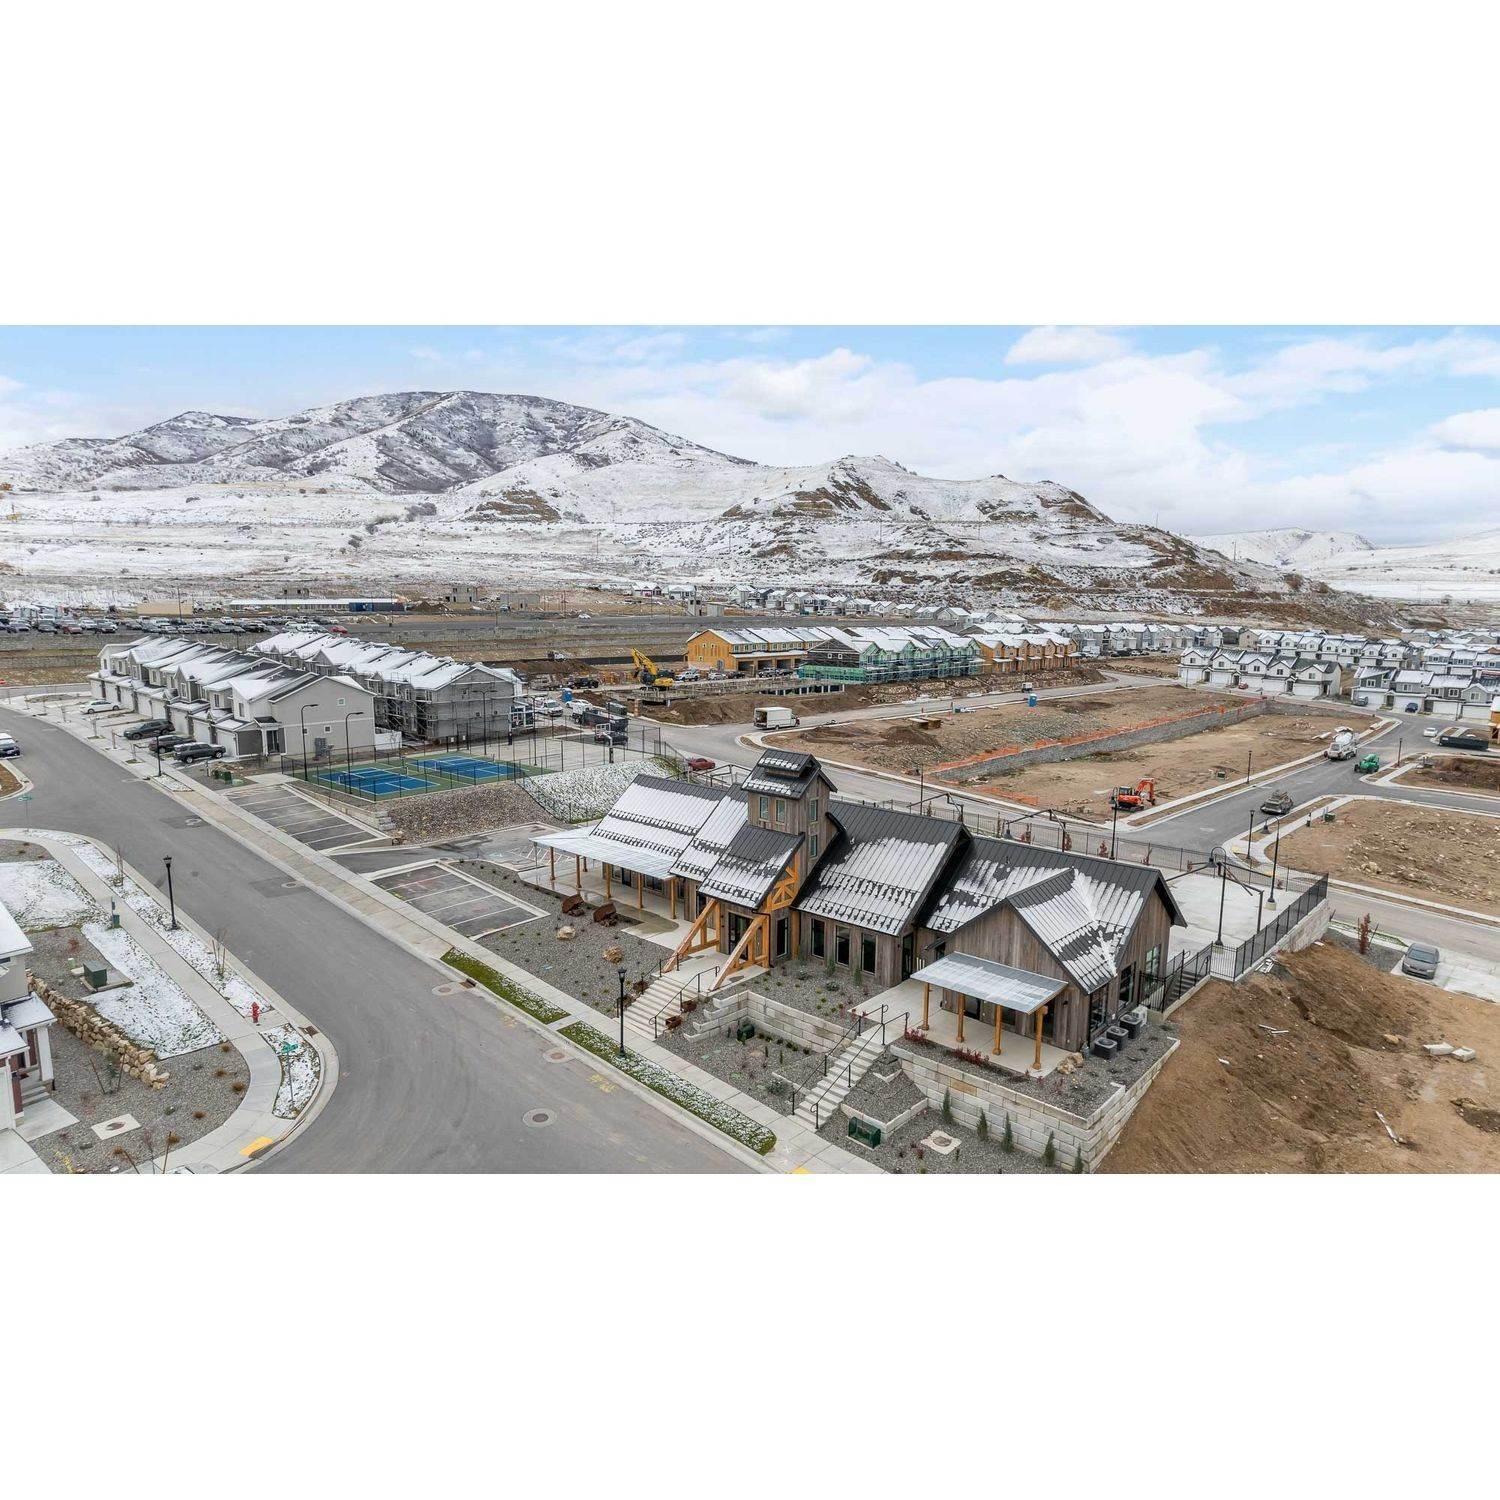 26. Little Valley Gateway xây dựng tại 8528 West Cordero Drive, Magna, UT 84044